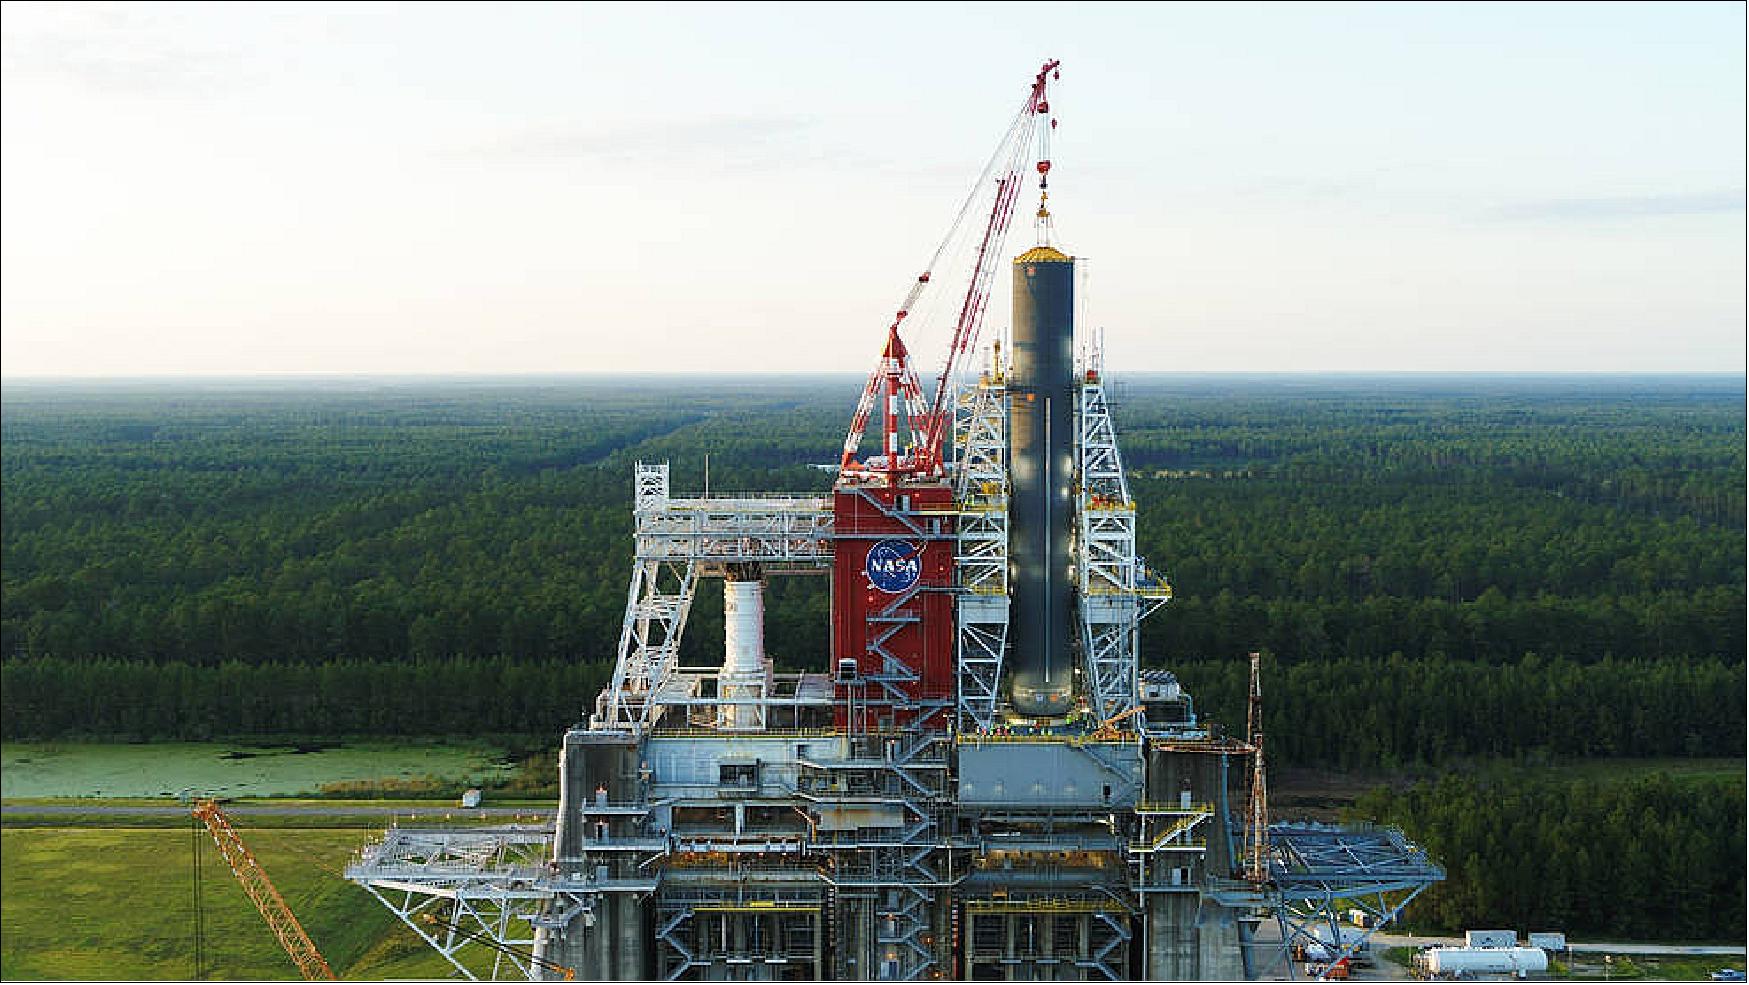 Figure 28: NASA’s Space Launch System (SLS) core stage pathfinder is positioned in the B-2 Test Stand at NASA’s Stennis Space Center near Bay St. Louis, Mississippi. The Pathfinder is the same shape, size and weight (without propellants loaded) as the actual SLS core stage flight hardware. Stennis work crews used it in August to train and practice handling and lifting techniques needed for the core stage flight hardware when it arrives at Stennis for testing in 2020 (image credit: NASA)